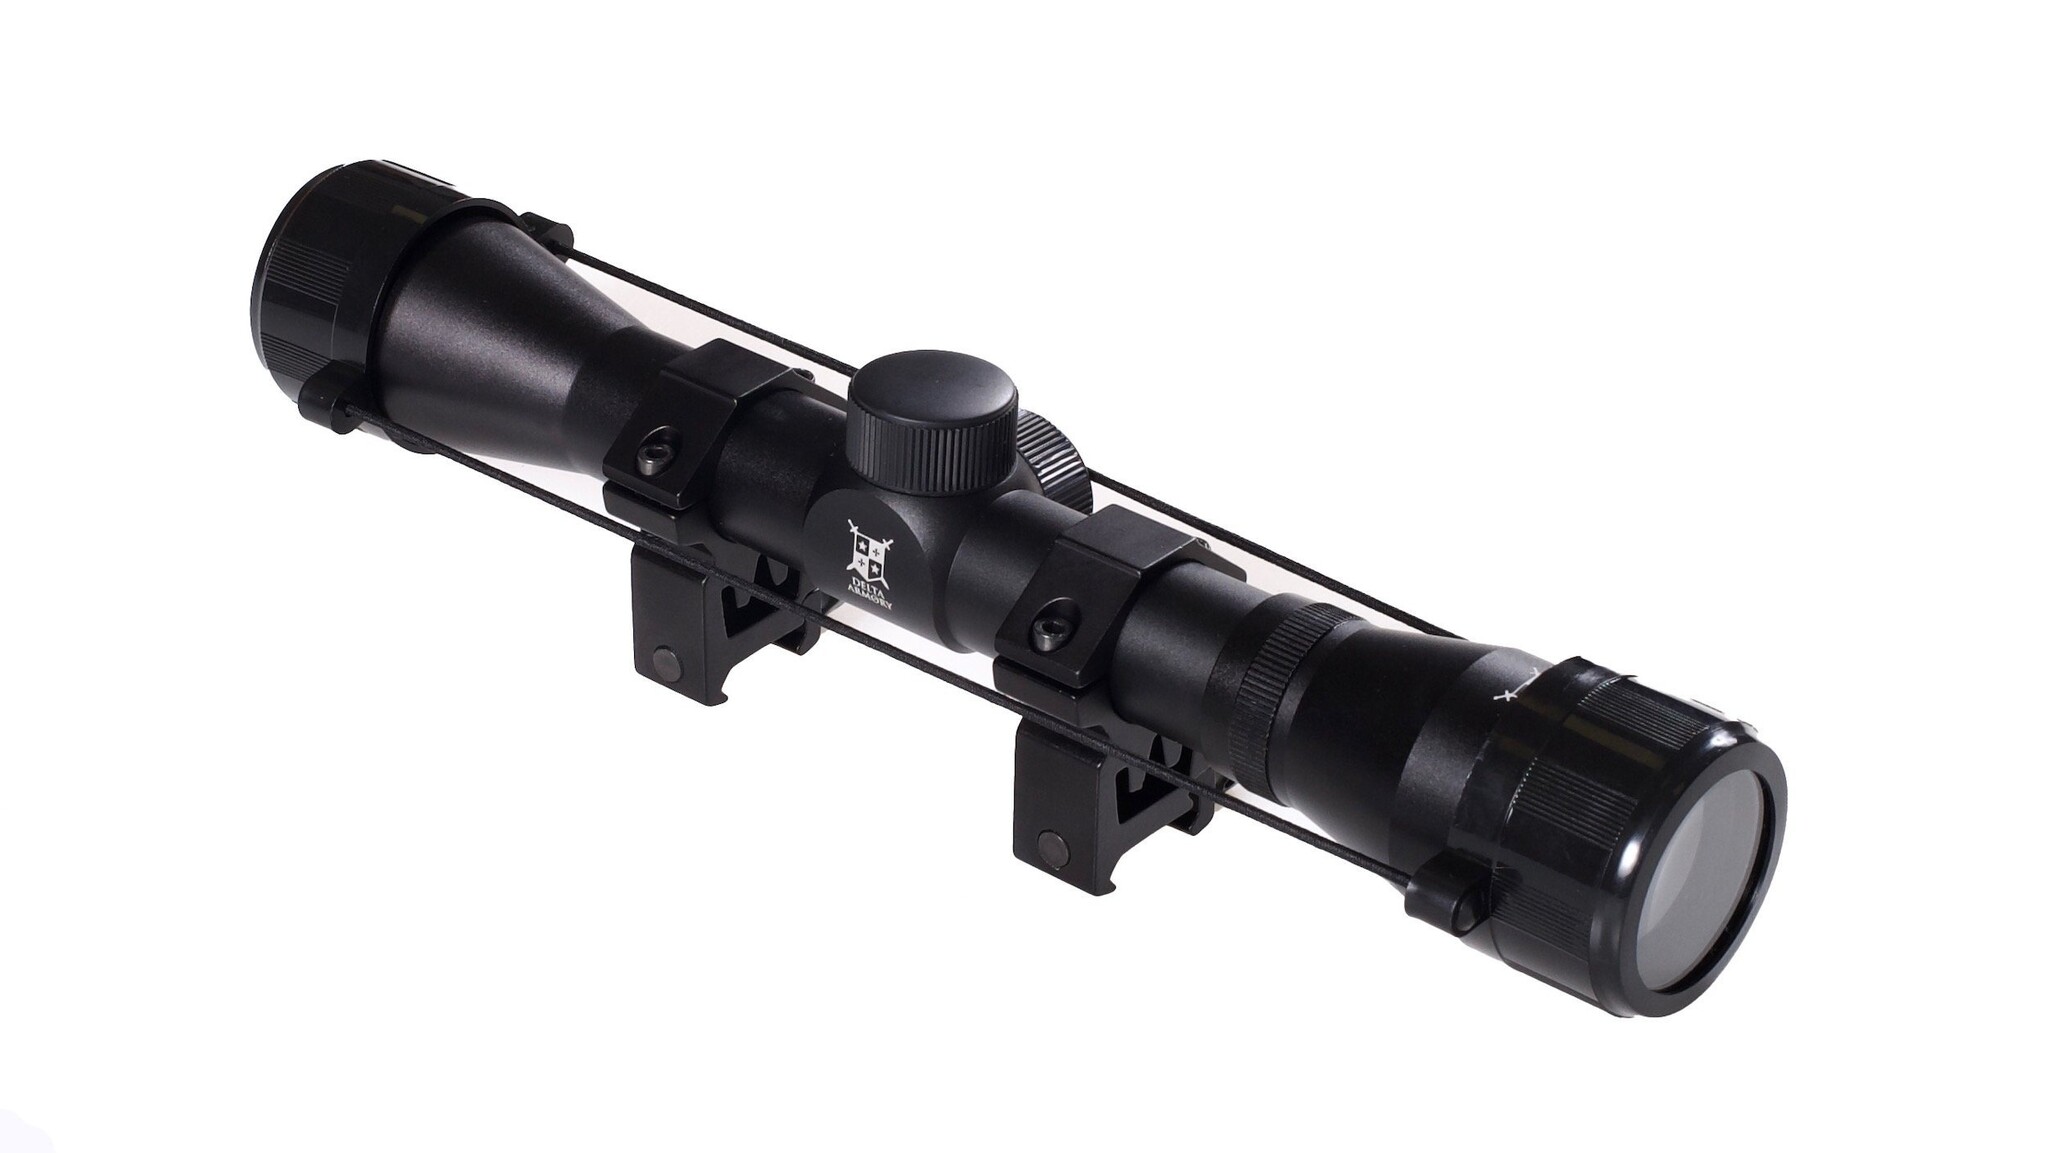 Delta Armory 4x32 rifle scope with 22 mm mounting rings - BK